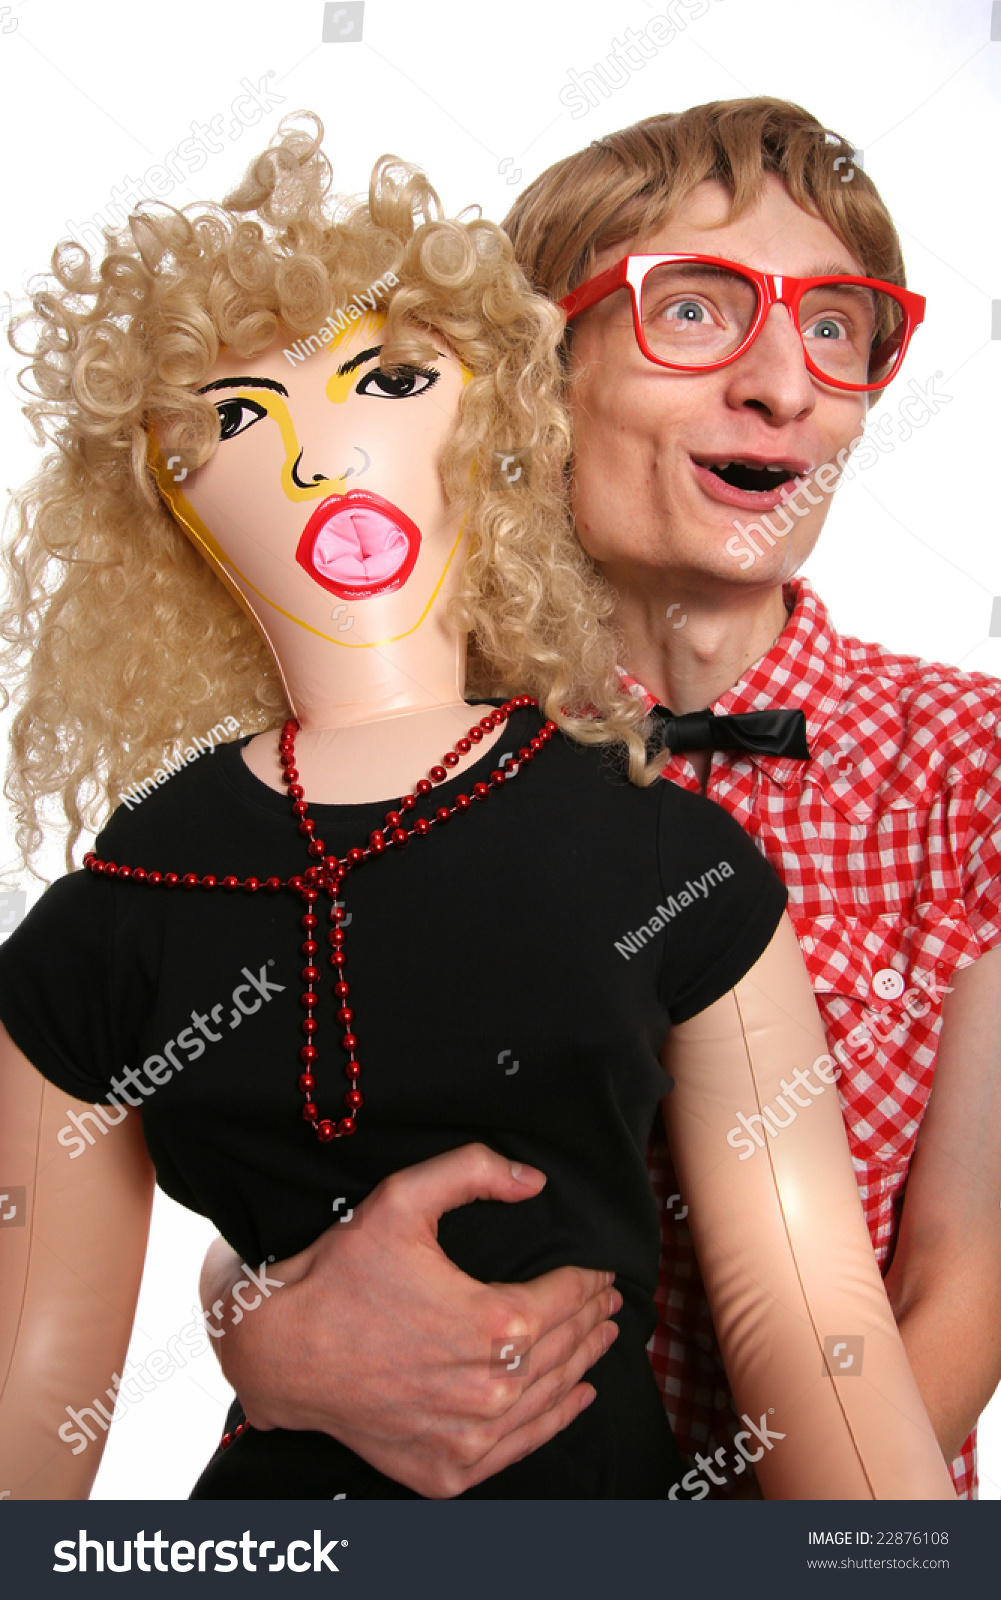 stock-photo-nerd-and-his-blow-up-girlfriend-similar-available-in-my-portfolio-22876108.jpg